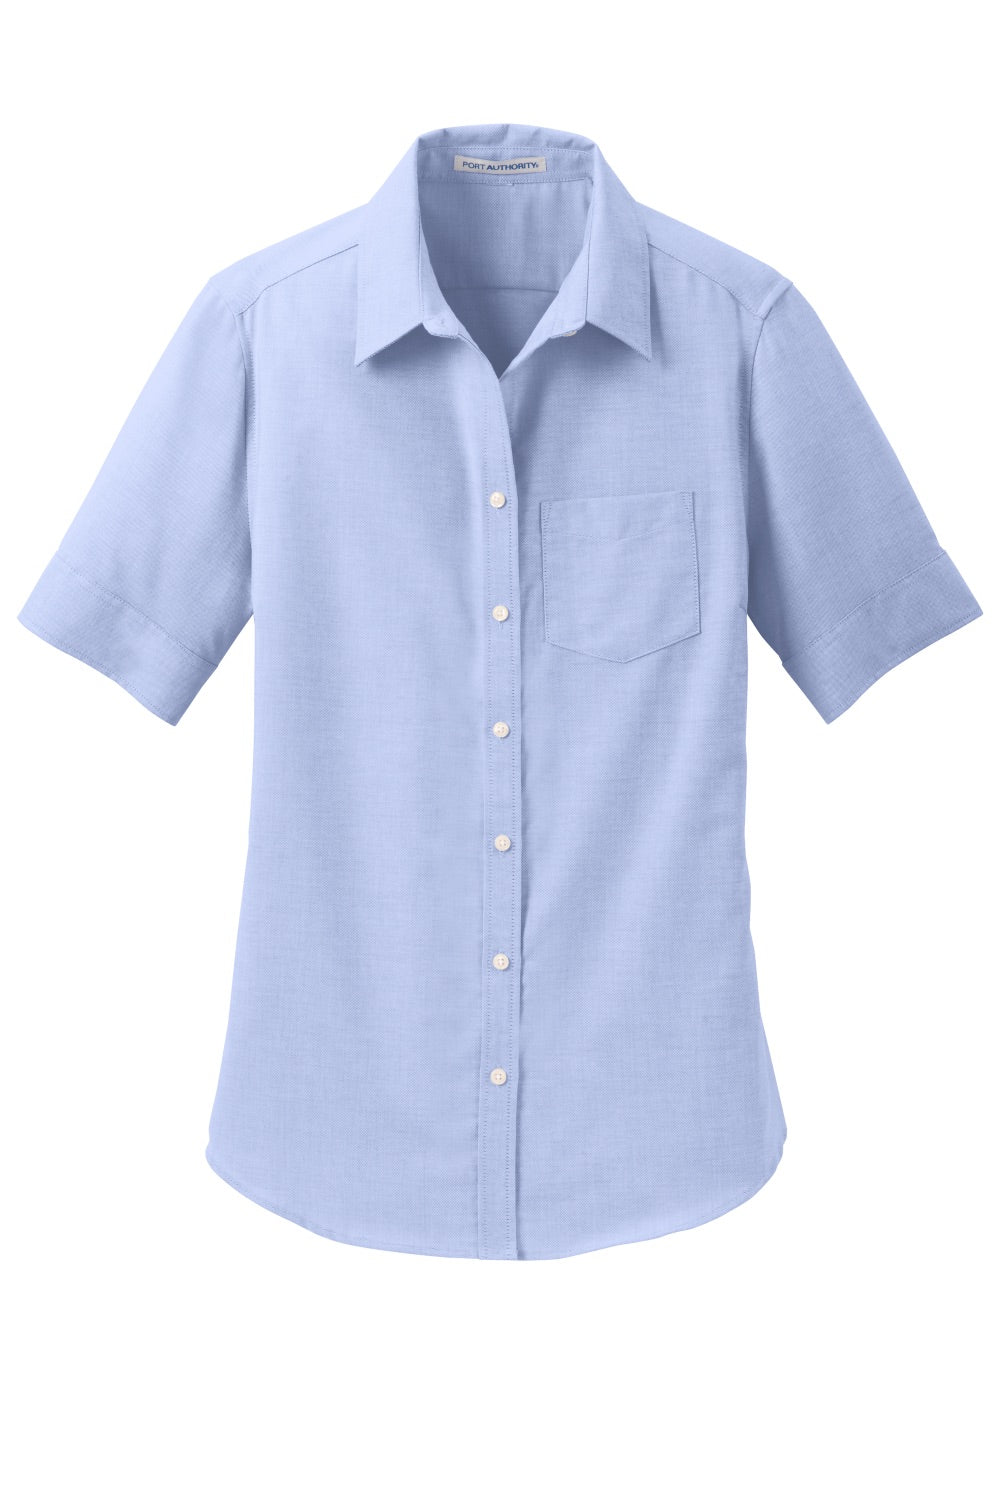 Port Authority L659 Womens SuperPro Oxford Wrinkle Resistant Short Sleeve Button Down Shirt w/ Pocket Oxford Blue Flat Front